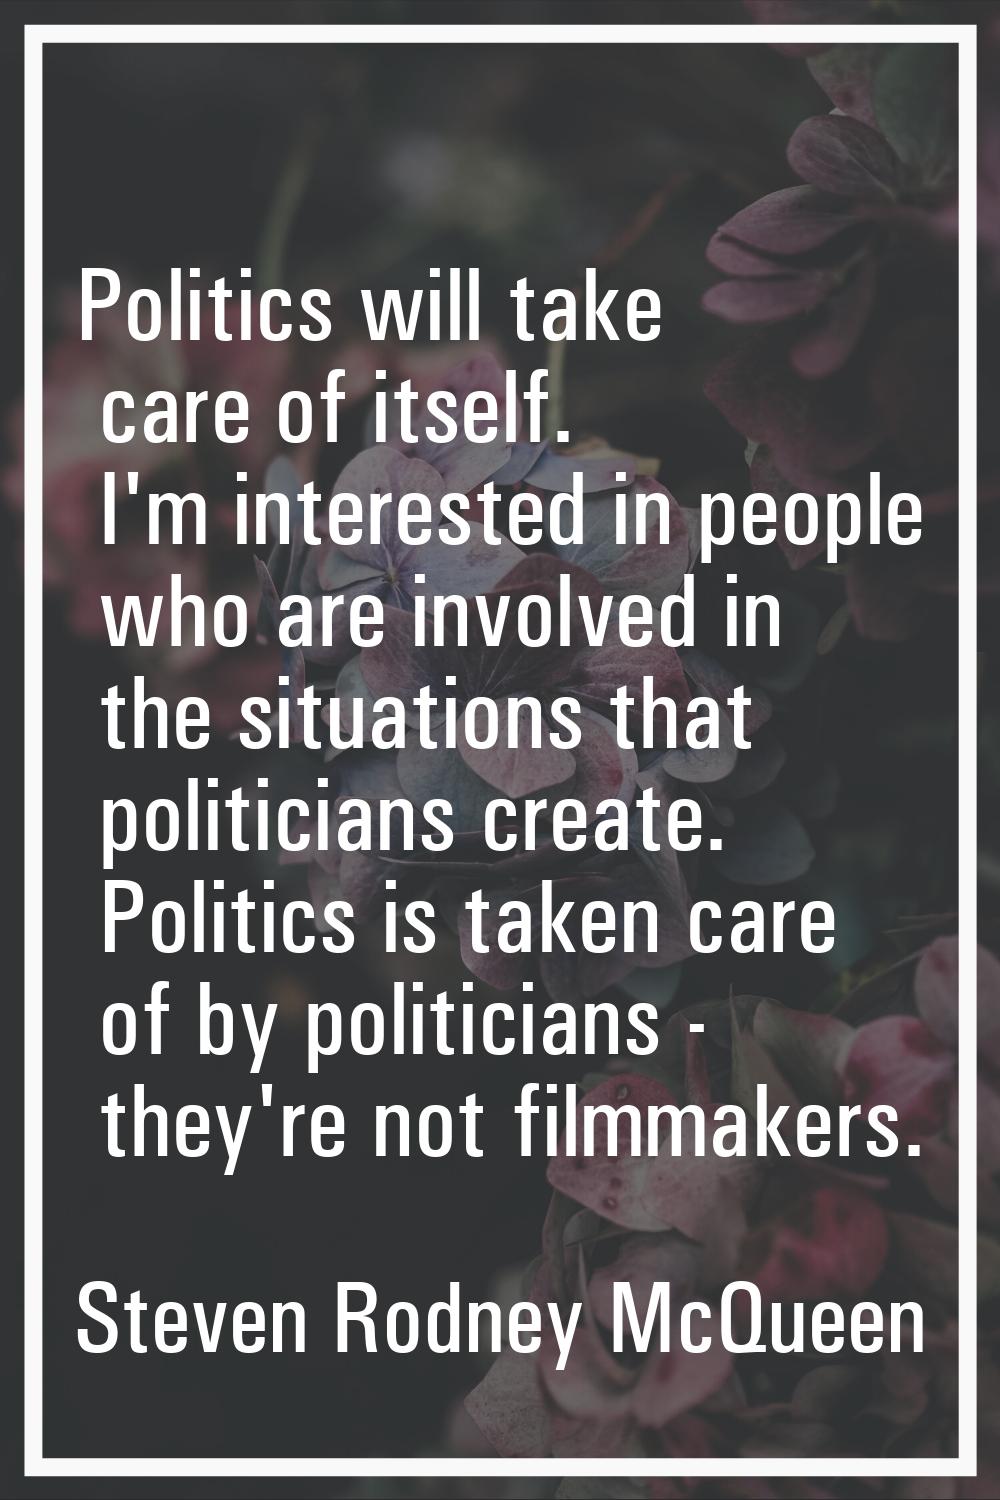 Politics will take care of itself. I'm interested in people who are involved in the situations that